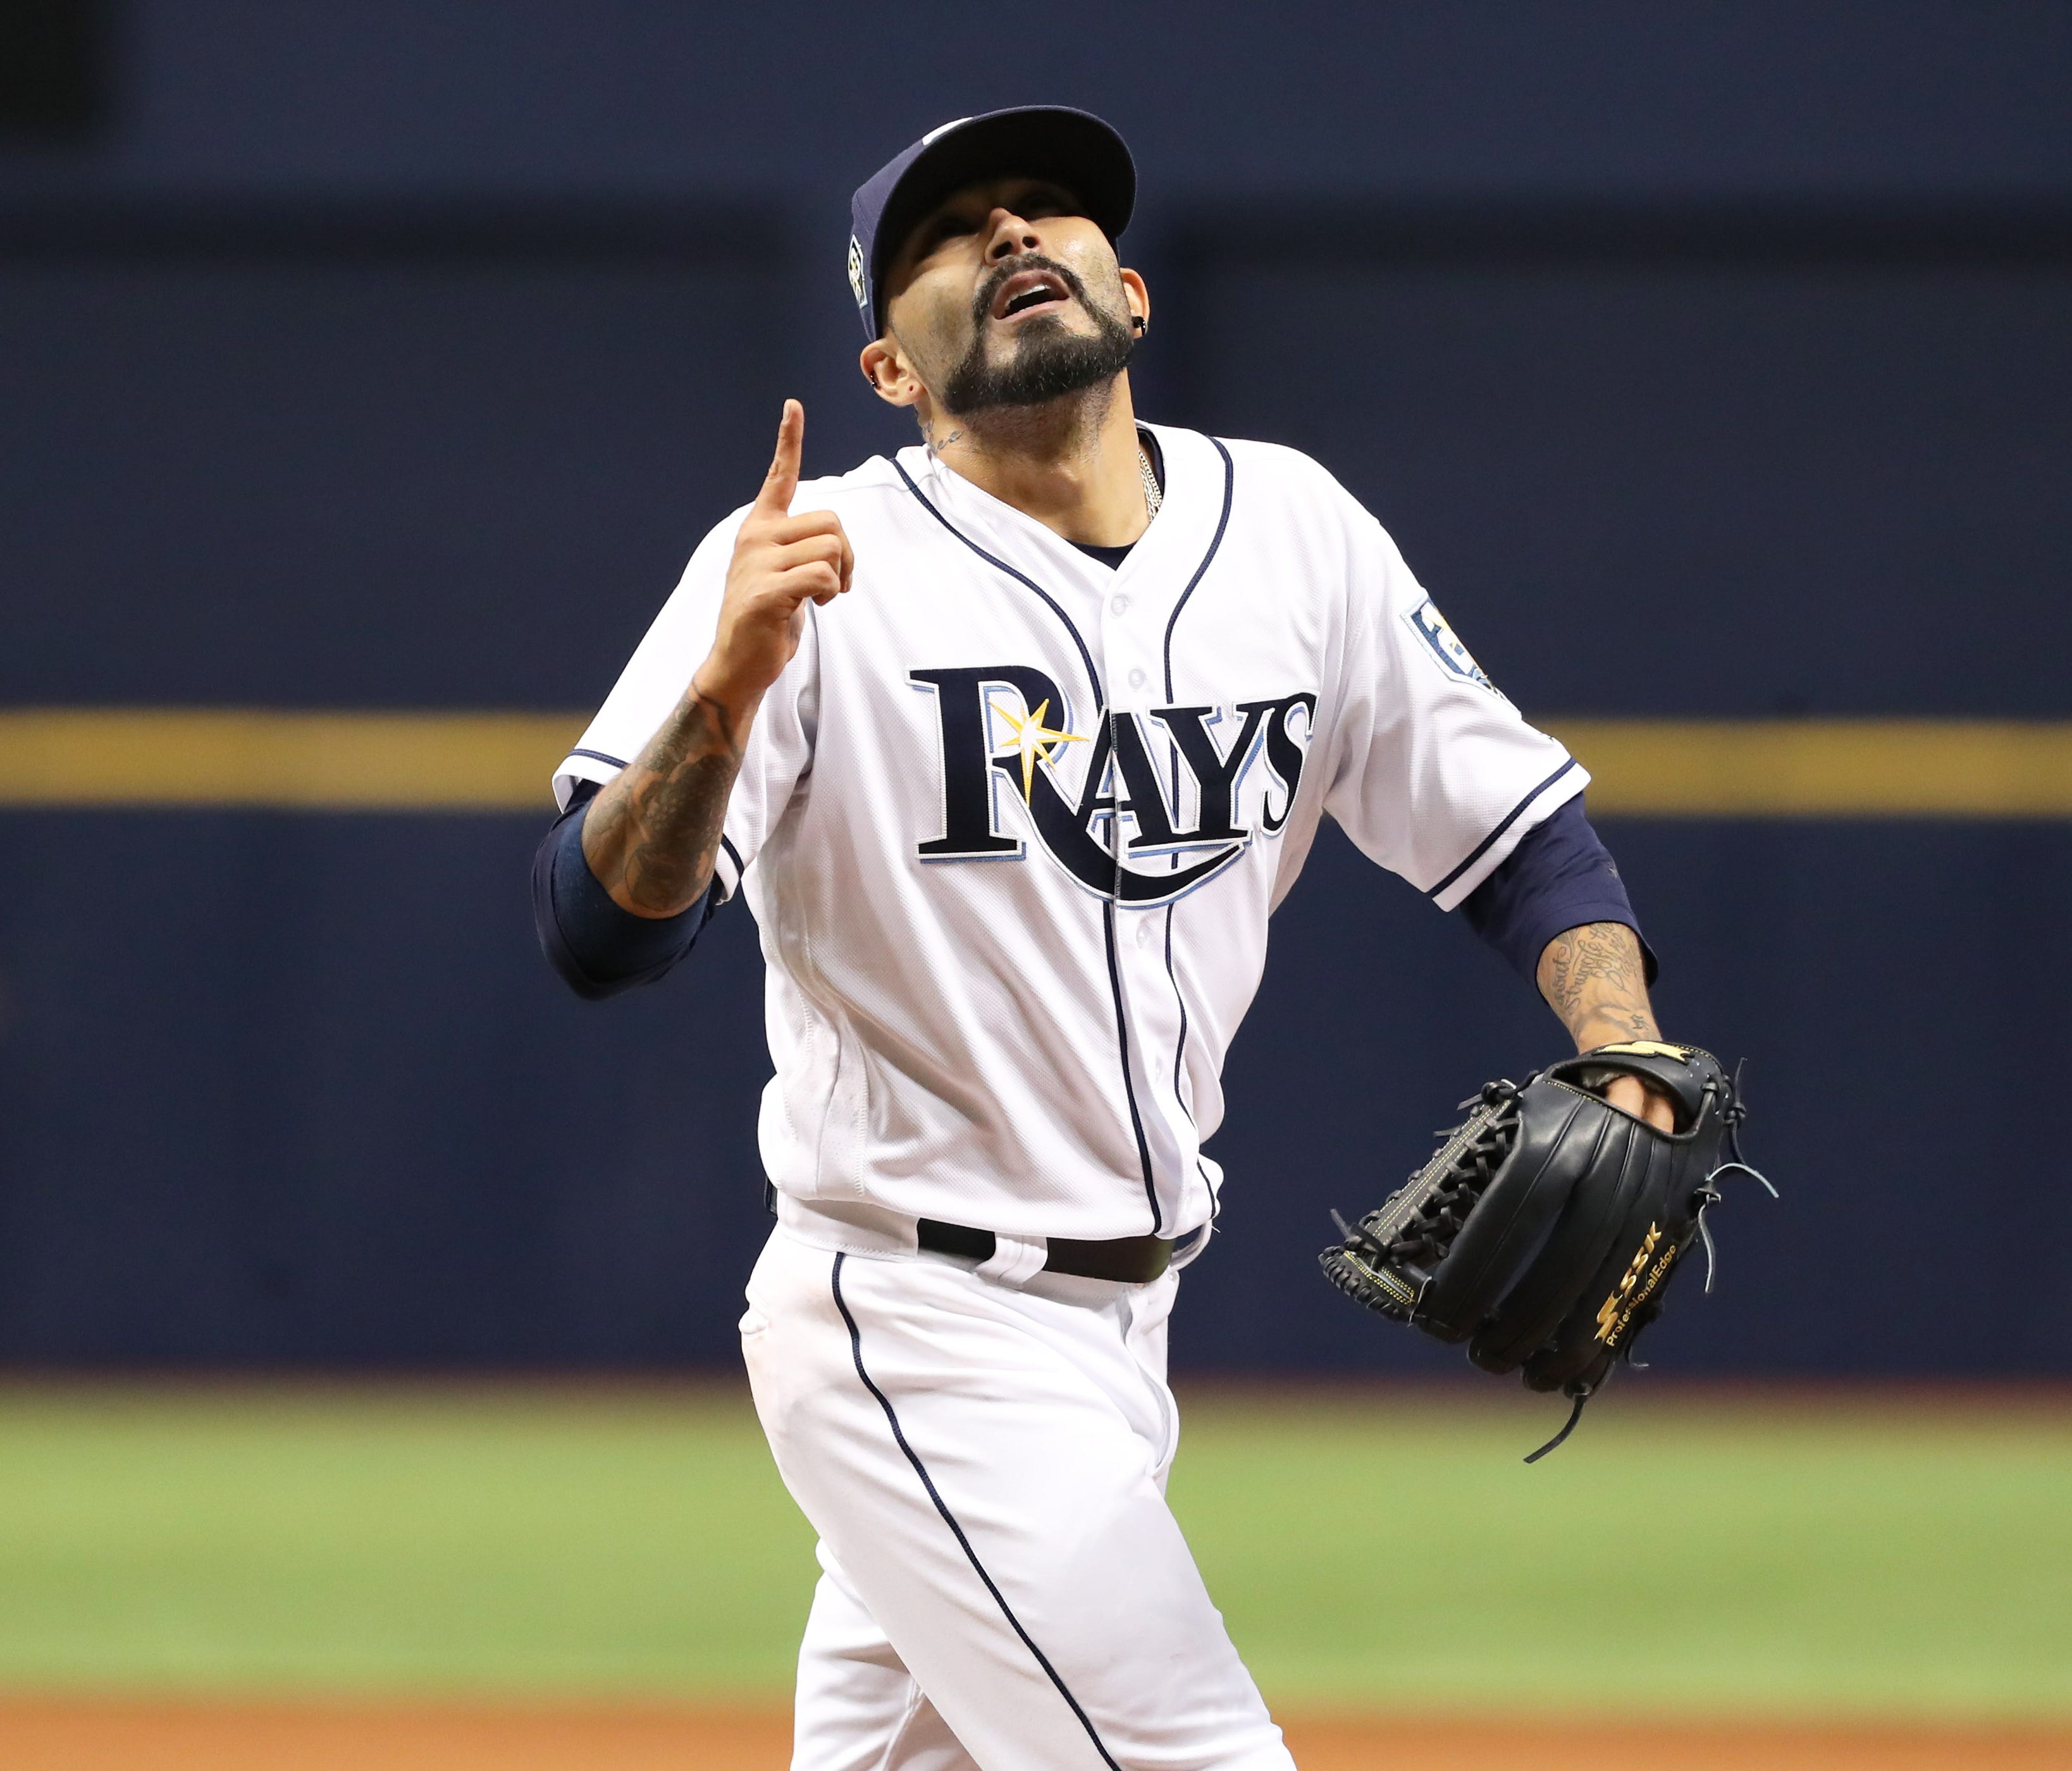 Sergio Romo started back-to-back games for the Rays.